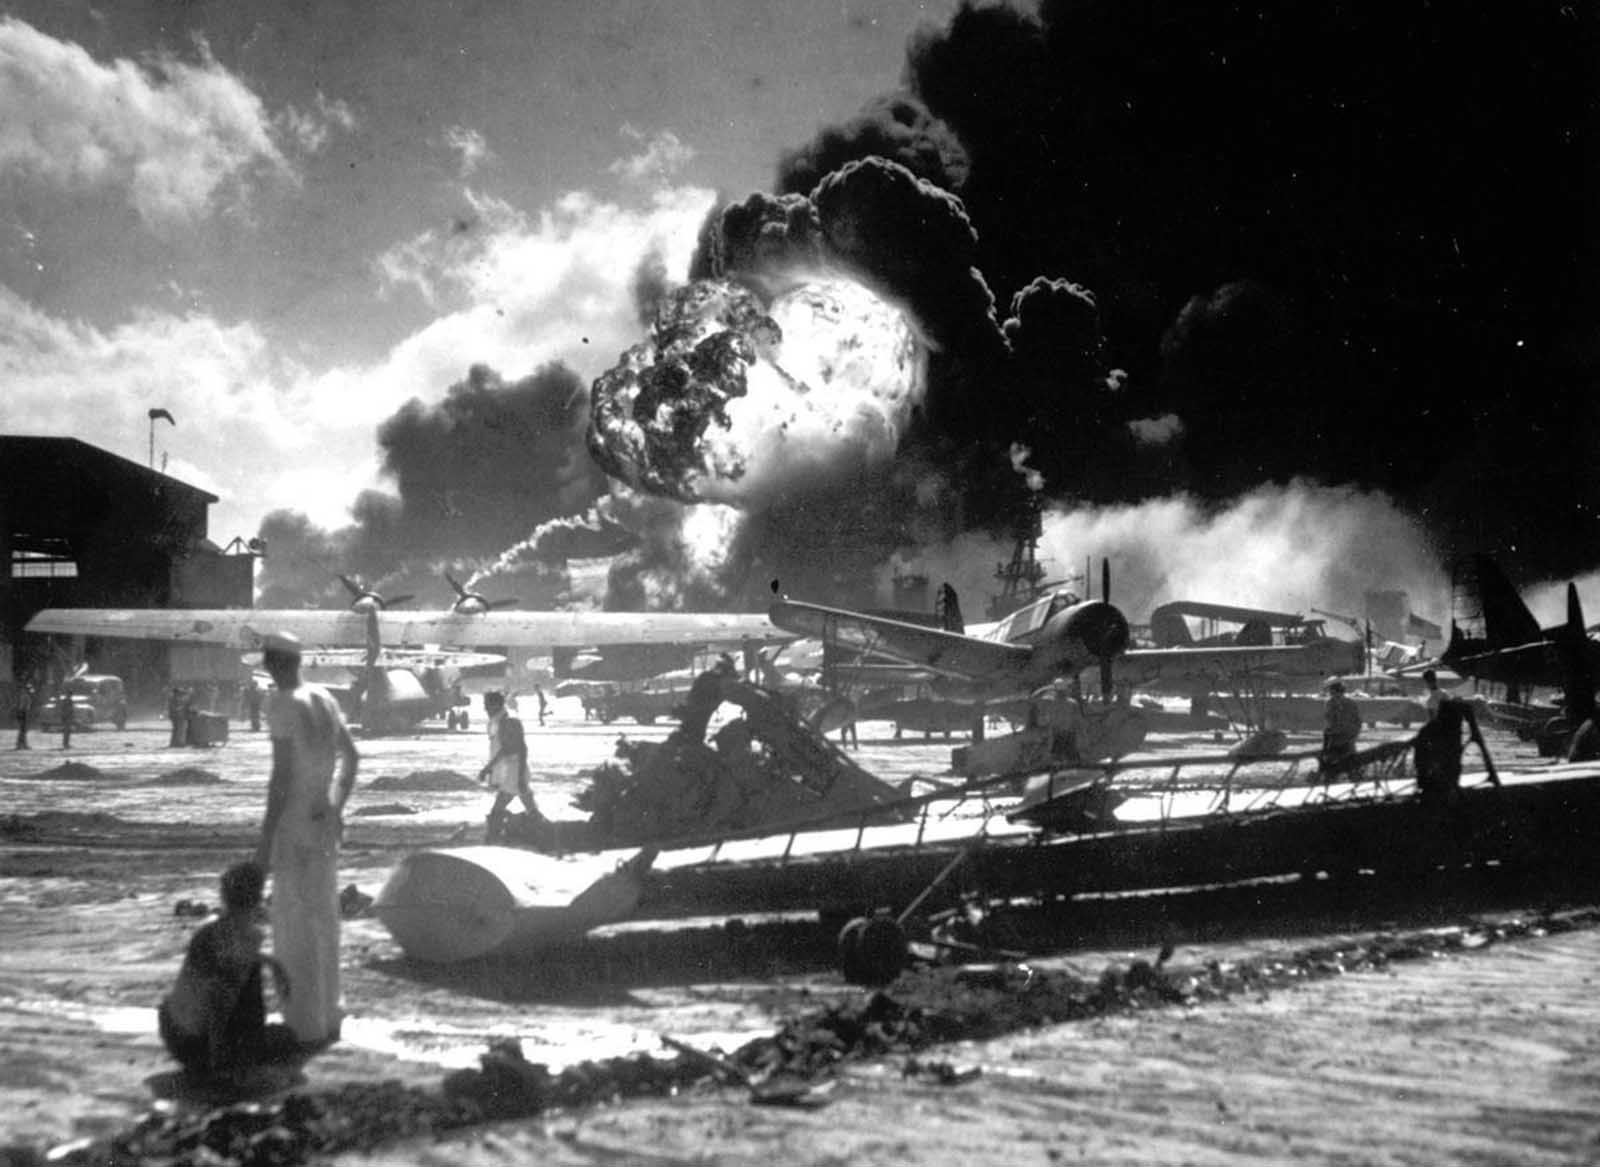 Sailors stand among wrecked airplanes at Ford Island Naval Air Station as they watch the explosion of the USS Shaw in the background, during the Japanese surprise attack on Pearl Harbor, Hawaii, December 7, 1941.